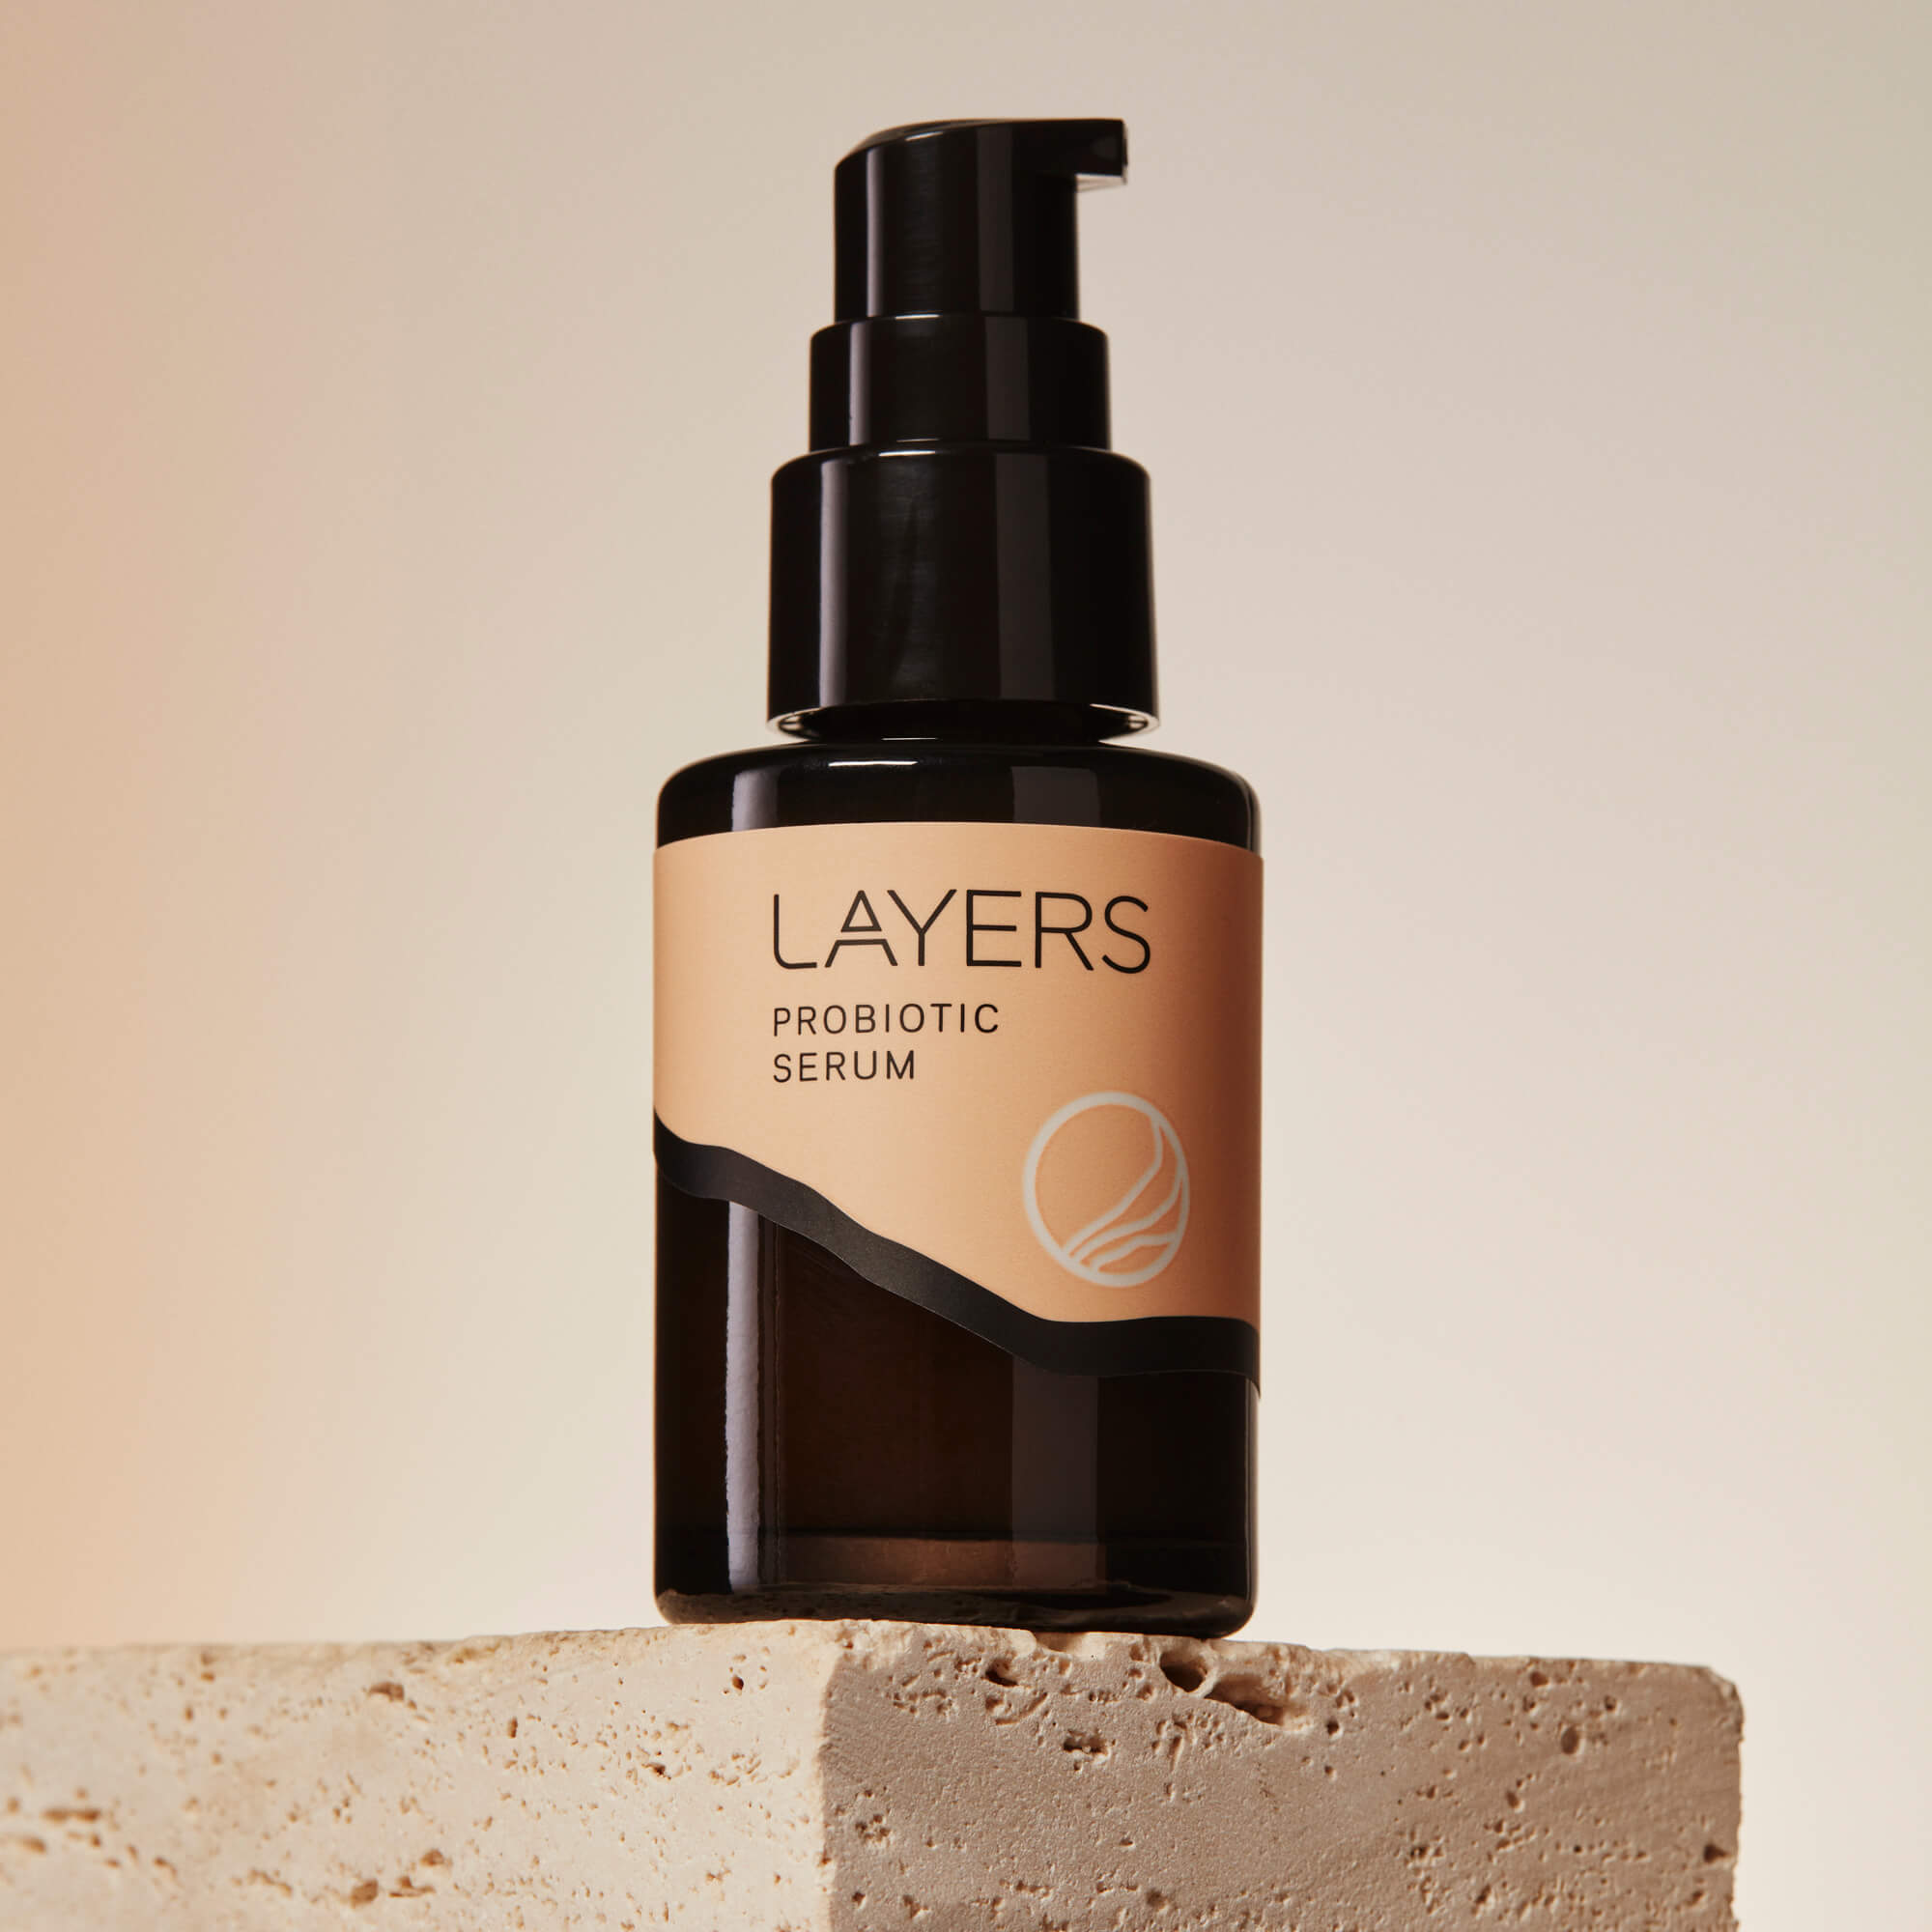 Layers Probiotic Skincare Probiotic Serum. Semi-transparent black glass bottle with pump. For dry, oily, and combination skin. 